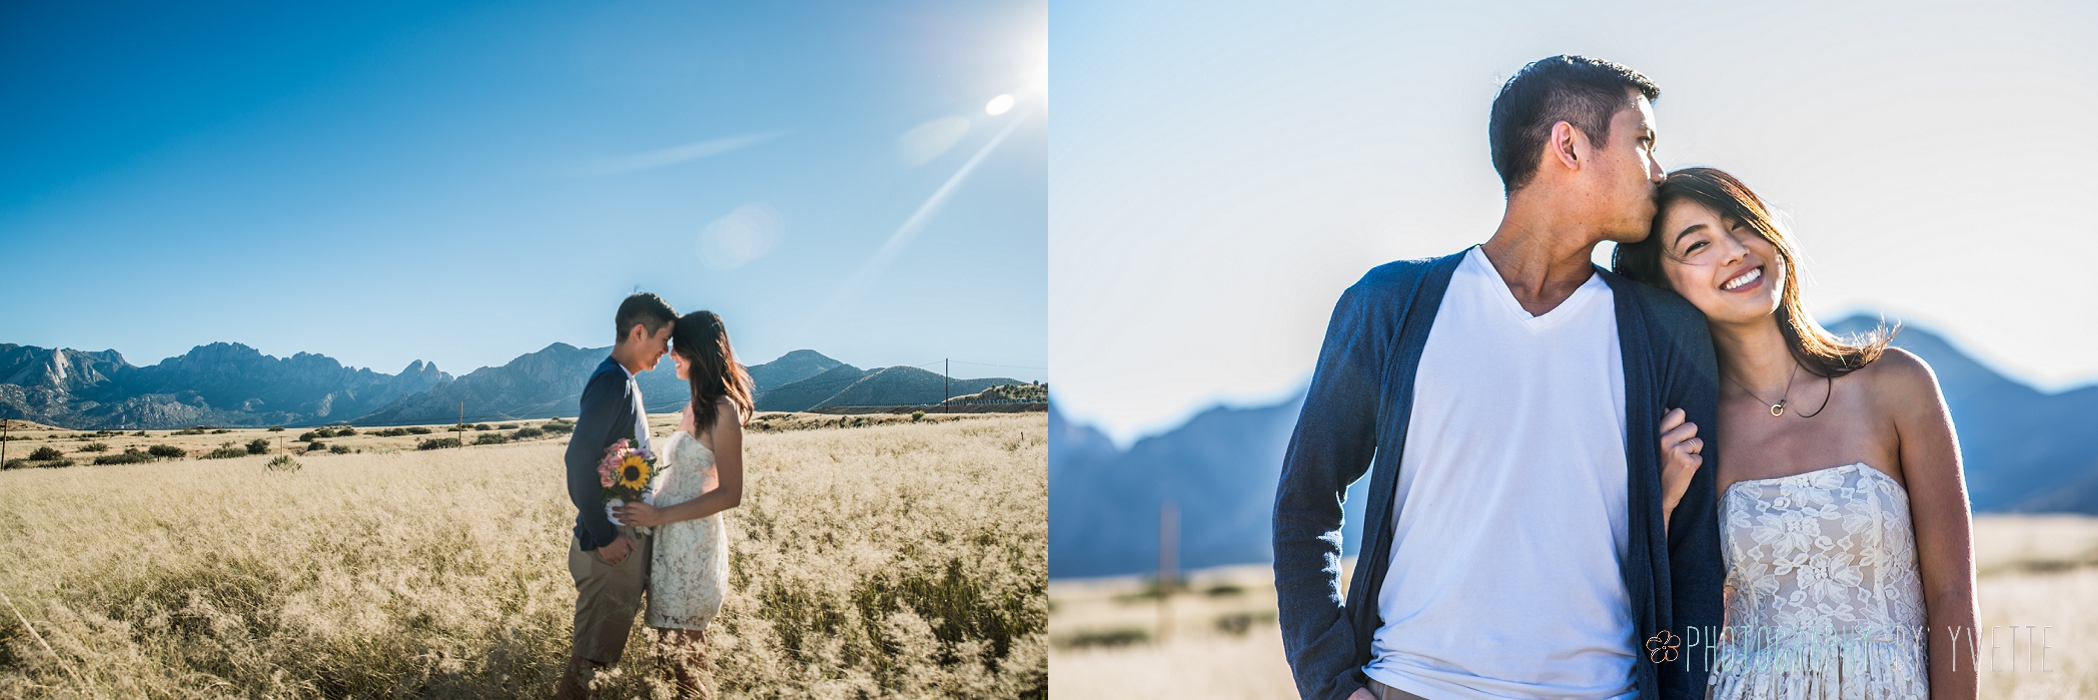 Las Cruces and El Paso Engagement Photographer